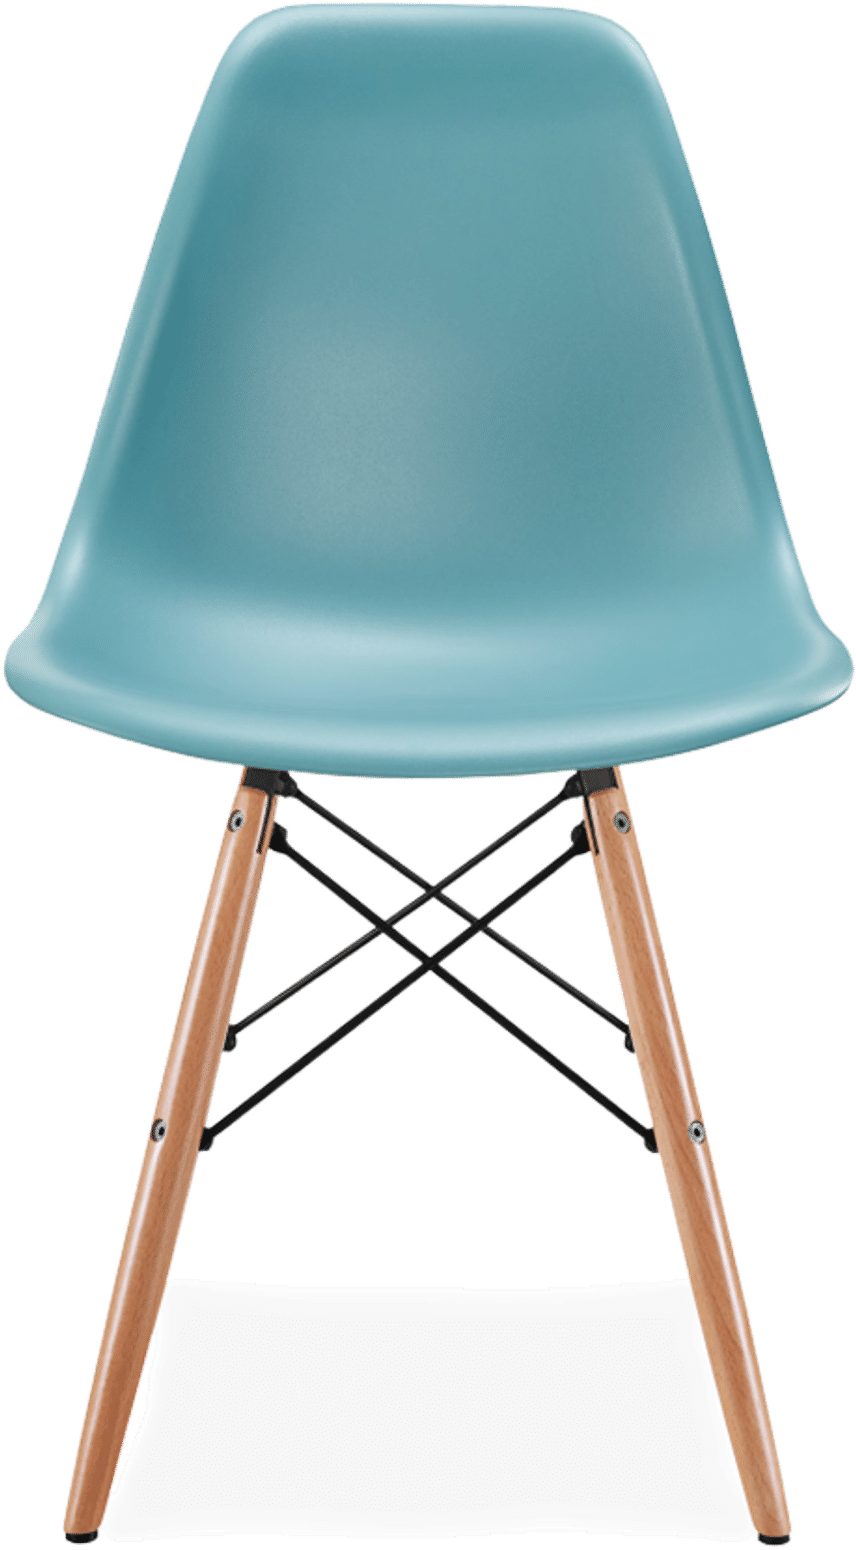 Silla DSW Style Teal/Light Wood image.